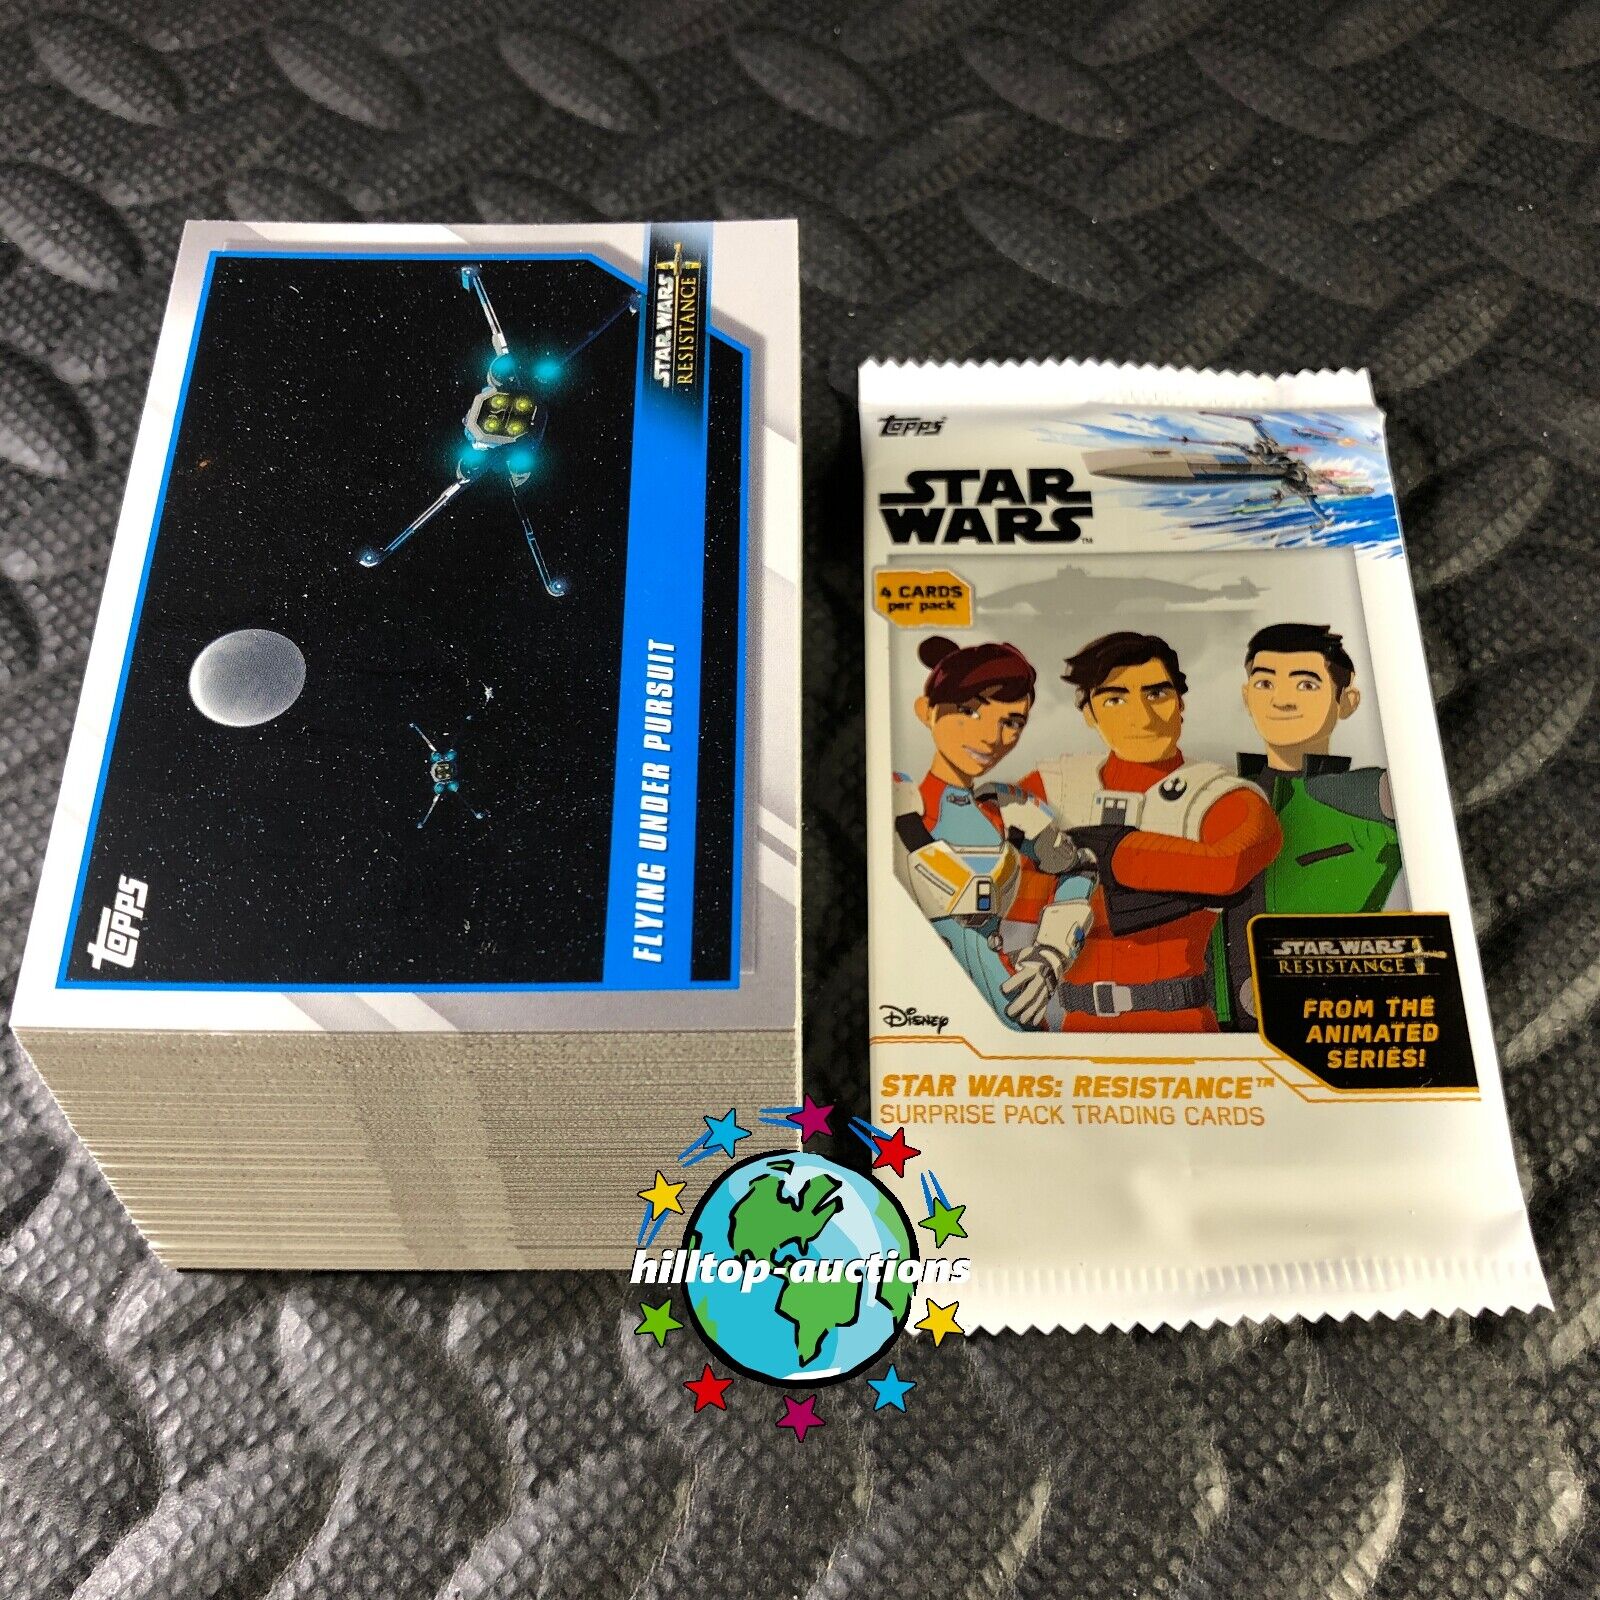 2019 TOPPS STAR WARS RESISTANCE COMPLETE BASE TRADING CARD SET OF 100 +WRAPPER